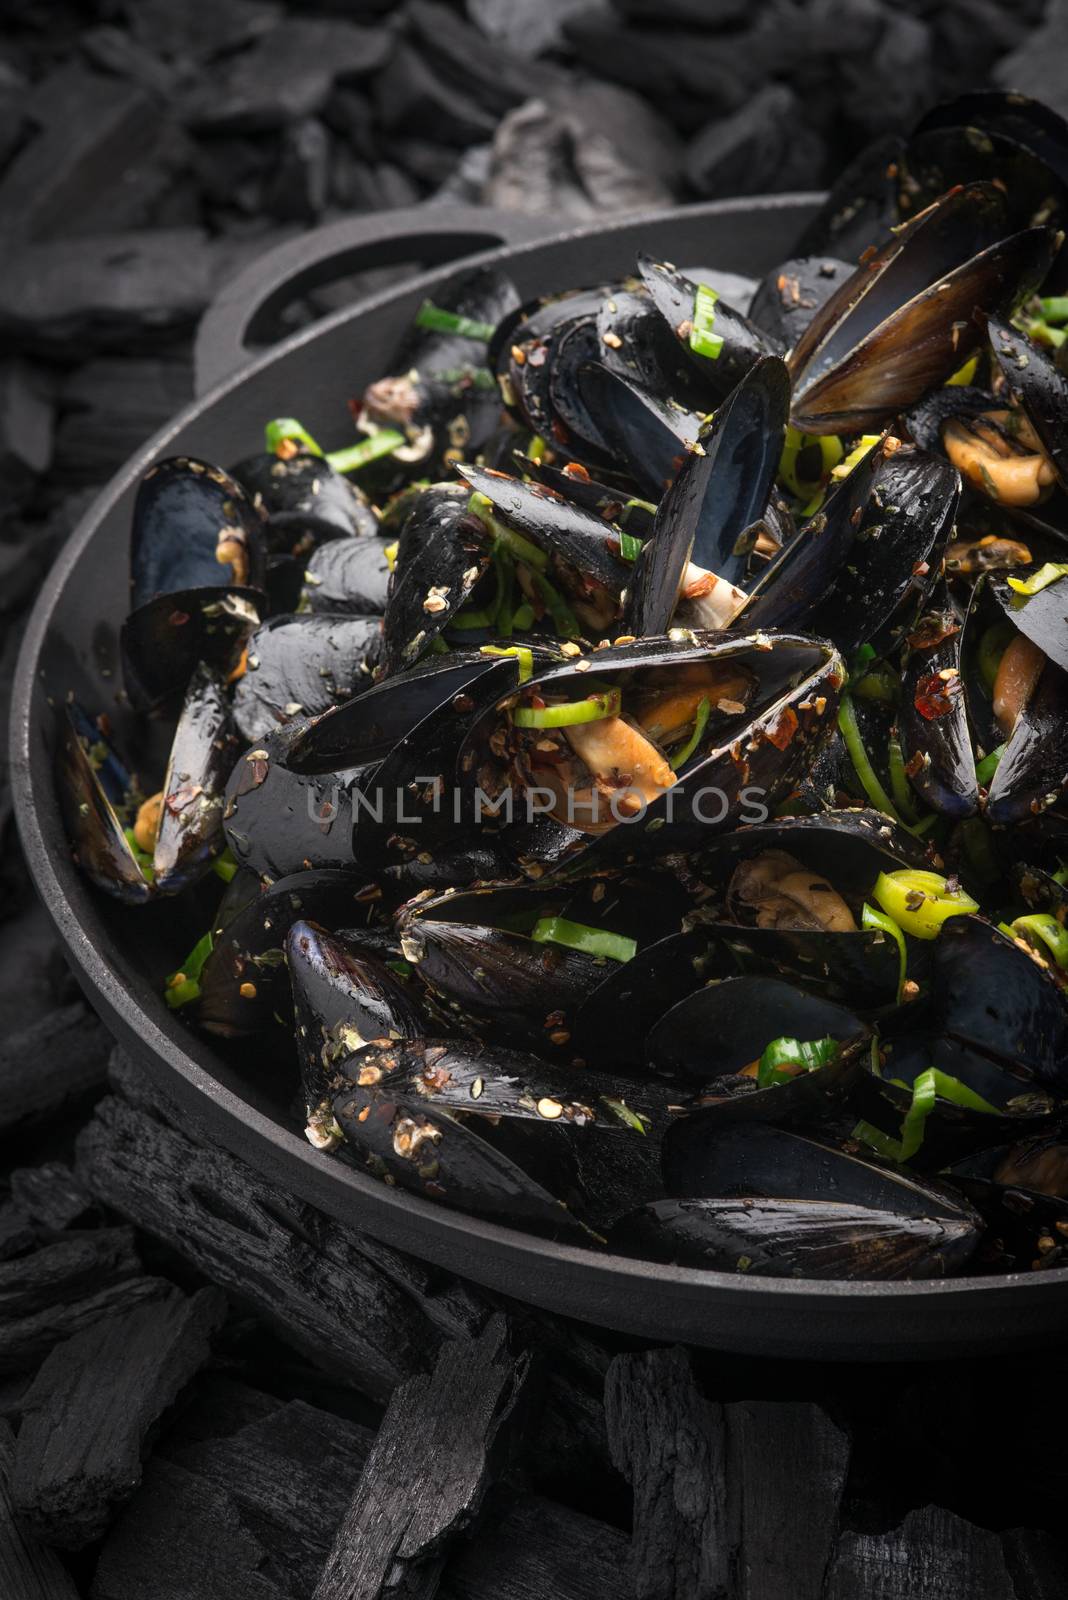 Steamed Mussels with vegetables in a black frying pan on the coals